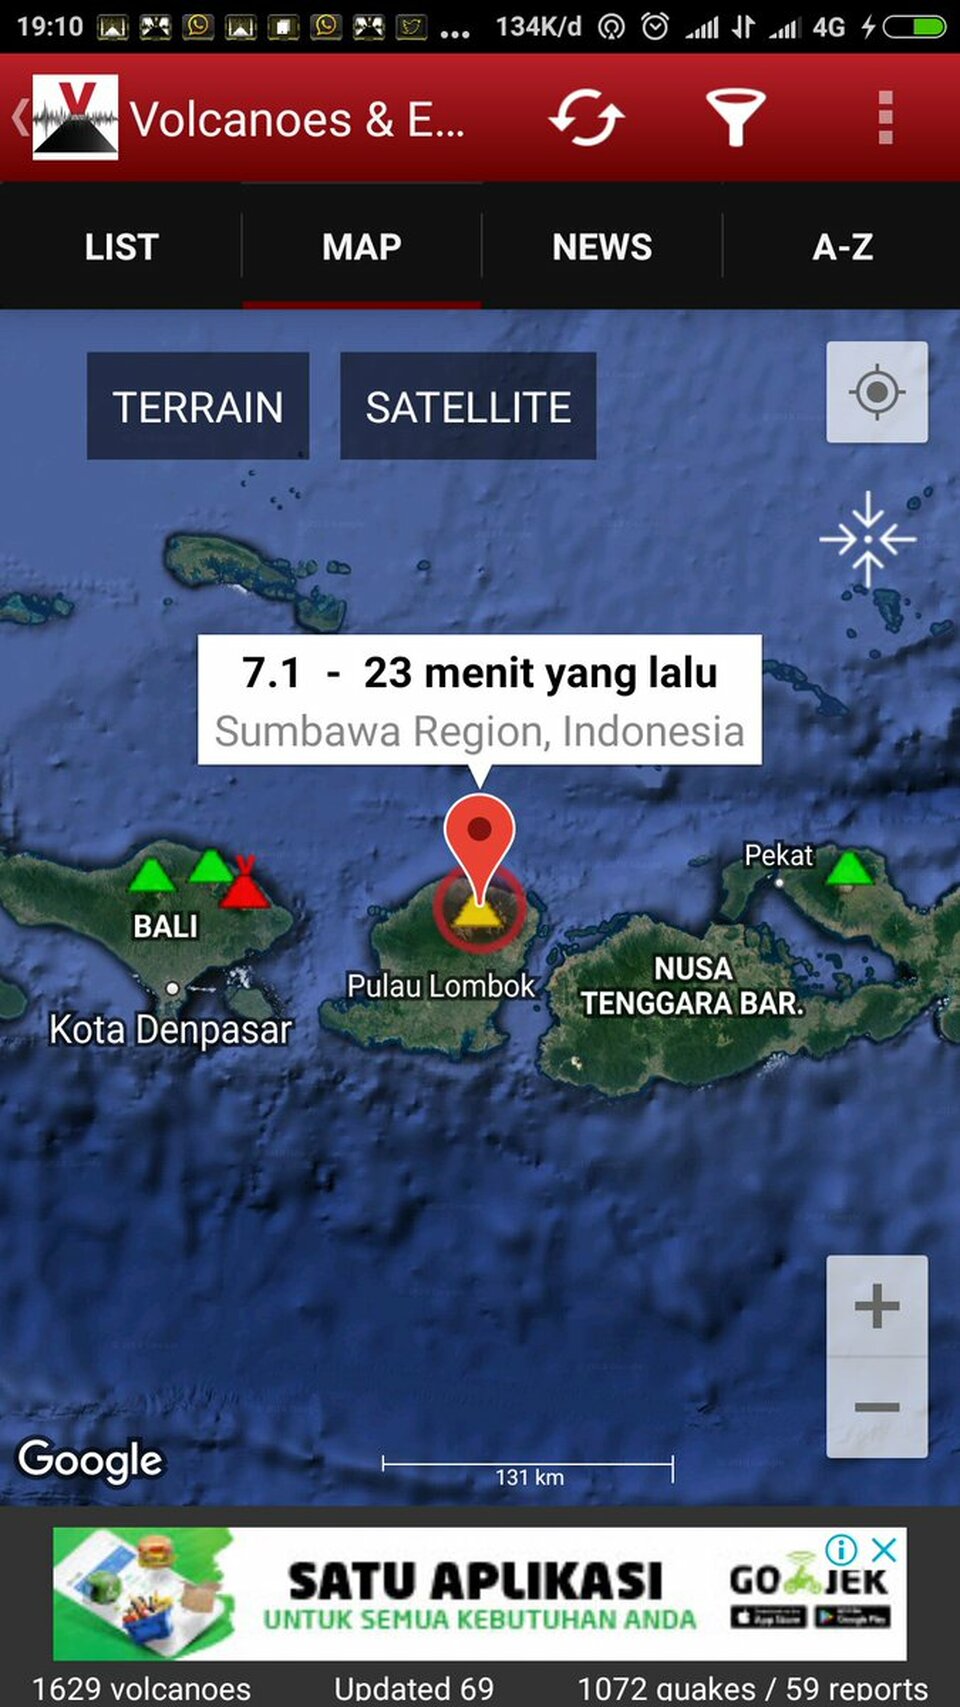 The Meteorology, Climatology and Geophysics Agency, or BMKG, issued a tsunami warning on Sunday (05/08) evening, following a magnitude 7 earthquake that hit northern part of Bali Island and Lombok Island. (Image courtesy of BMKG)